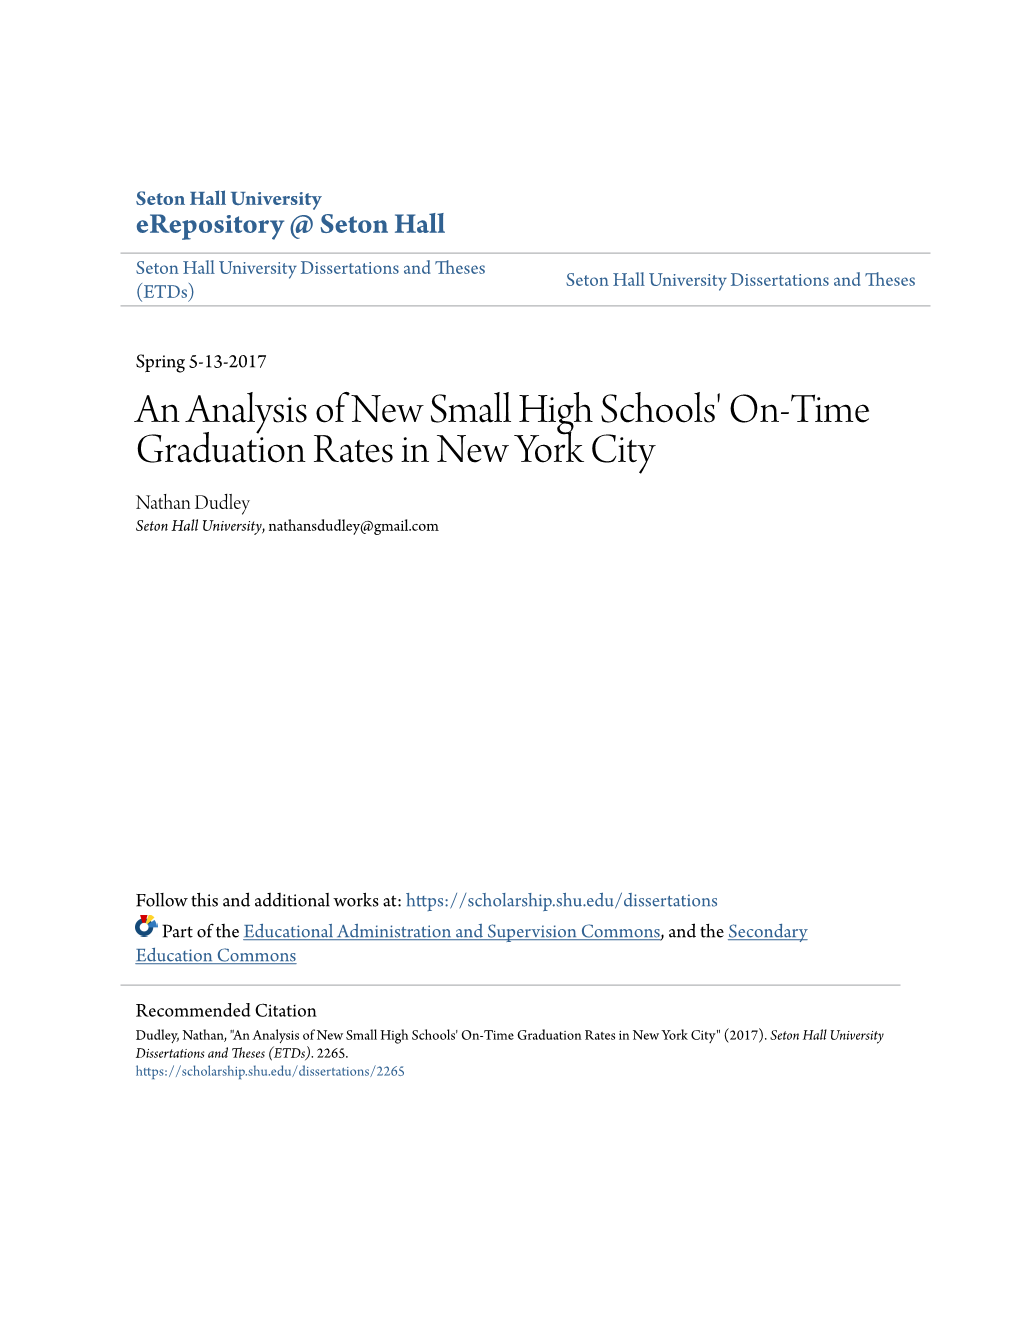 An Analysis of New Small High Schools' On-Time Graduation Rates in New York City Nathan Dudley Seton Hall University, Nathansdudley@Gmail.Com